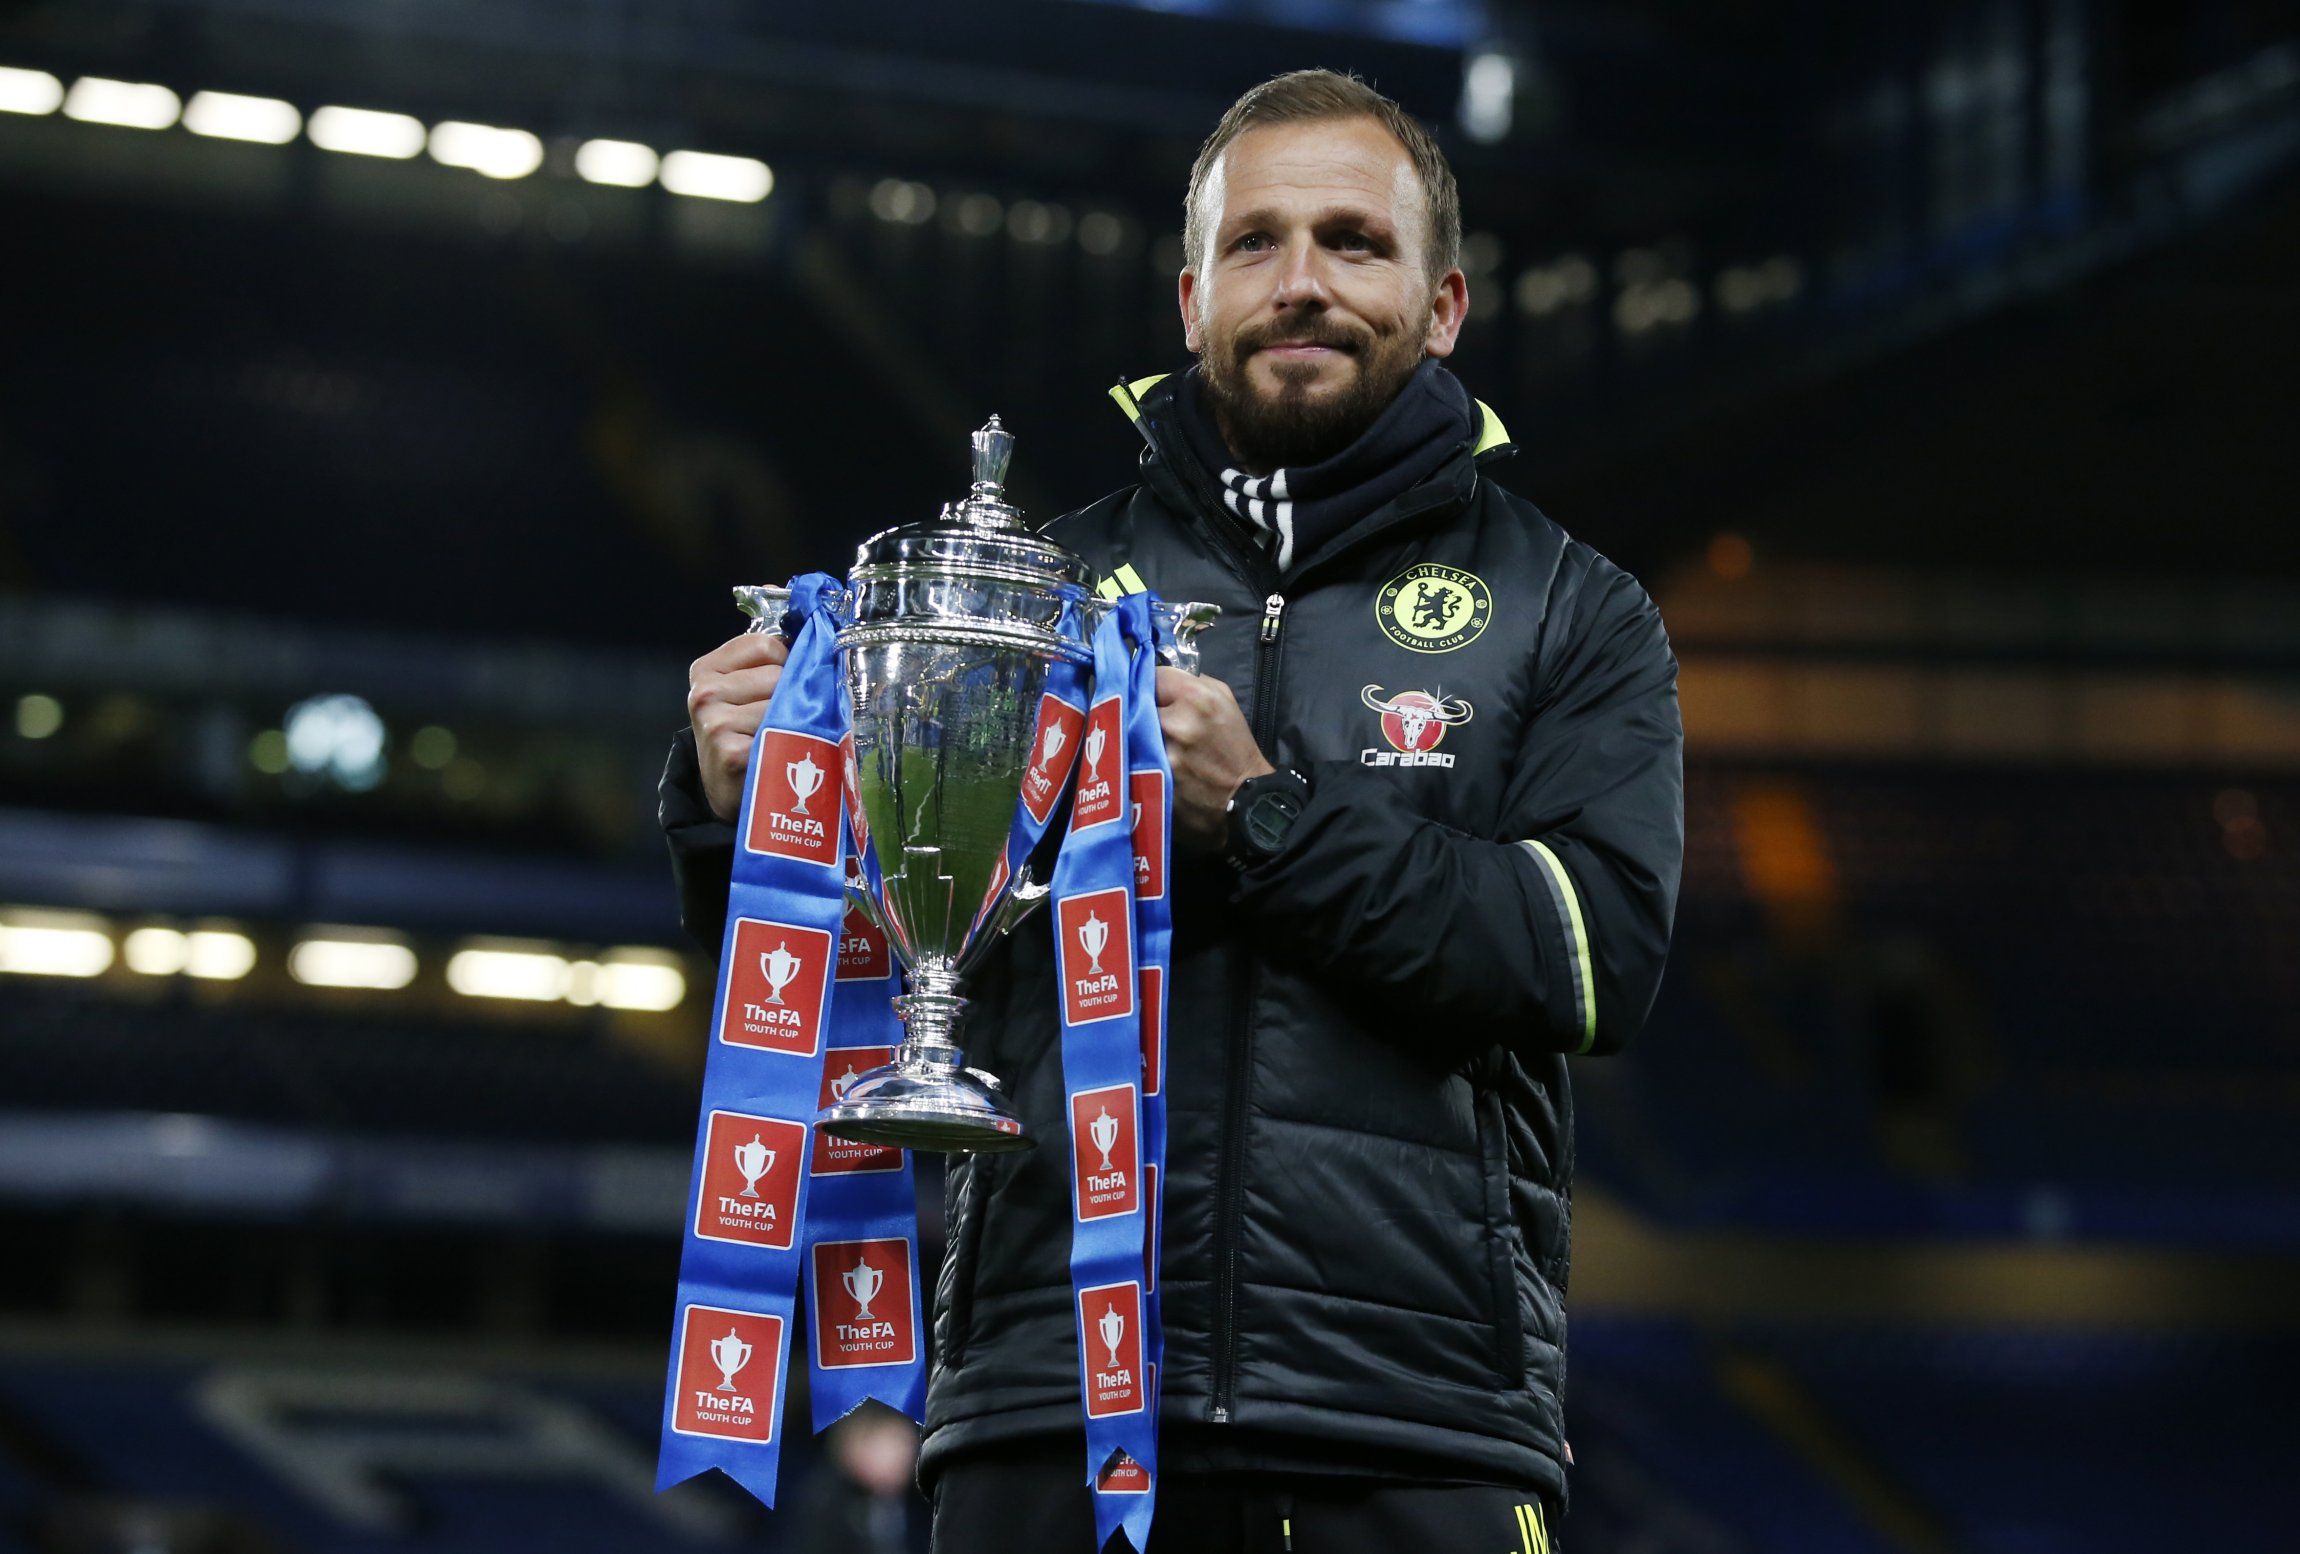 Chelsea coach Jody Morris lifts the FA Youth Cup